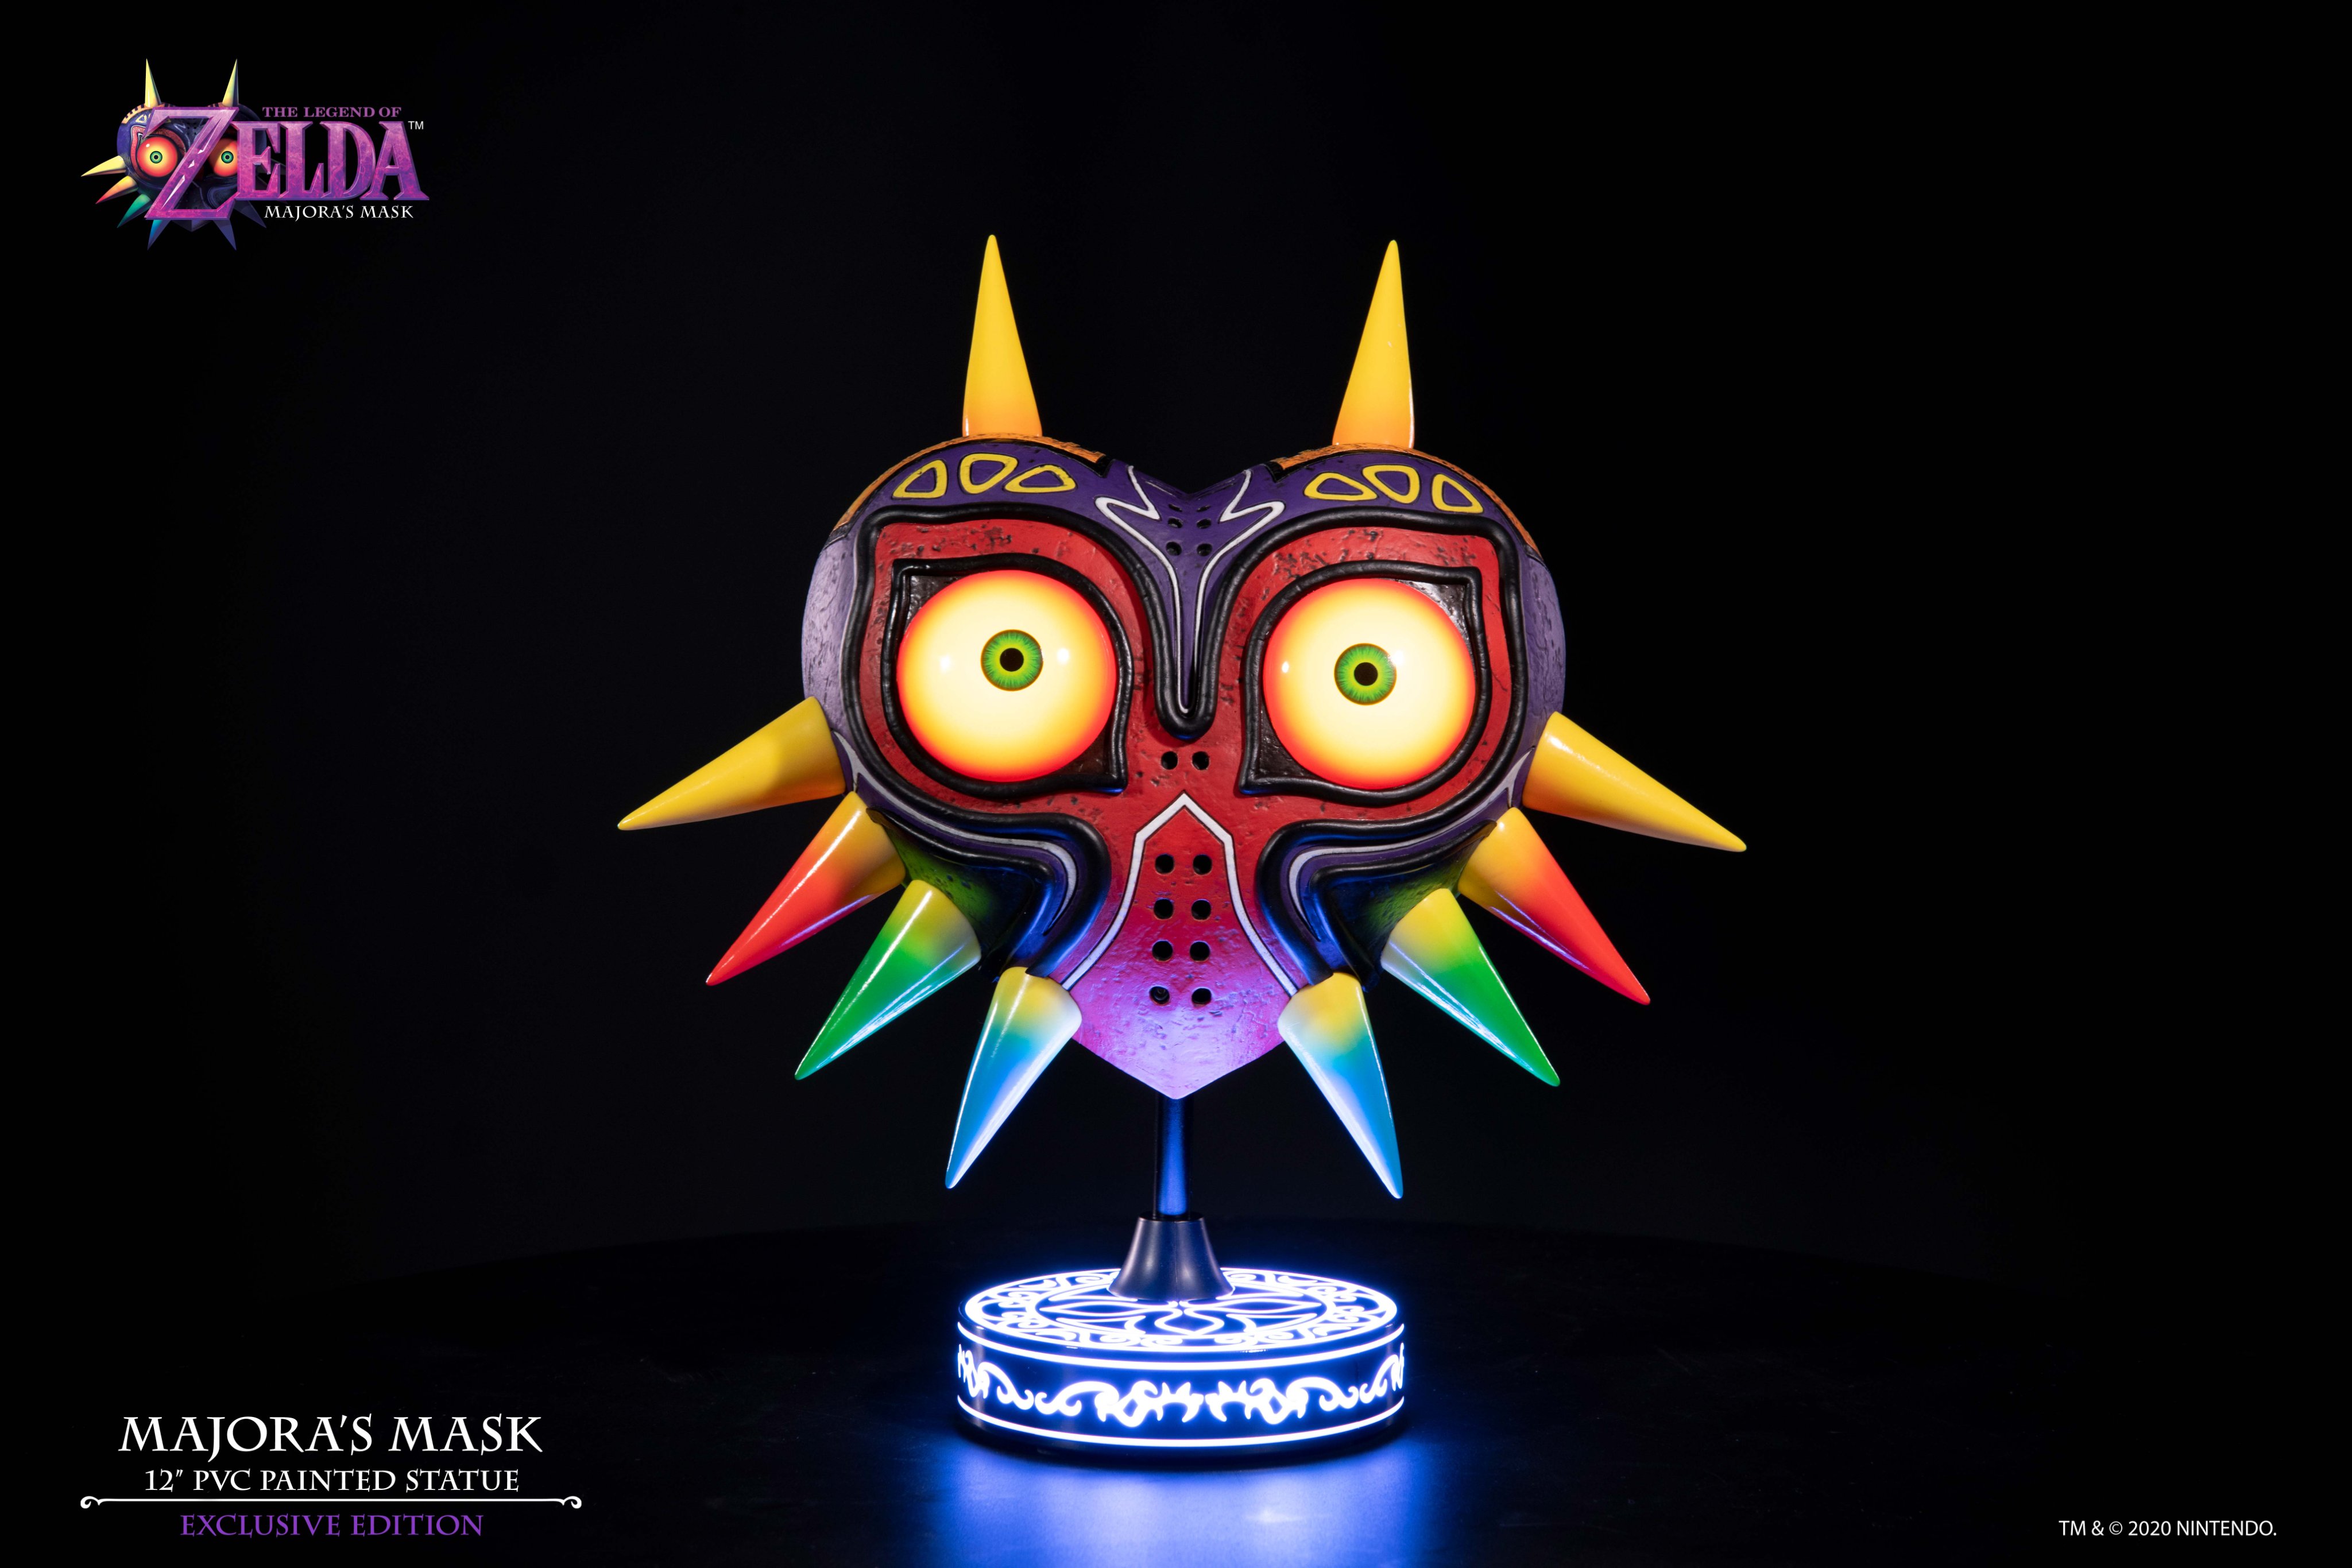 First 4 Figures on X: Unboxing The Legend of Zelda™: Majora's Mask – Majora's  Mask PVC statue! The Exclusive Edition comes w/ a Premium Deluxe Box and  LED functions for the base